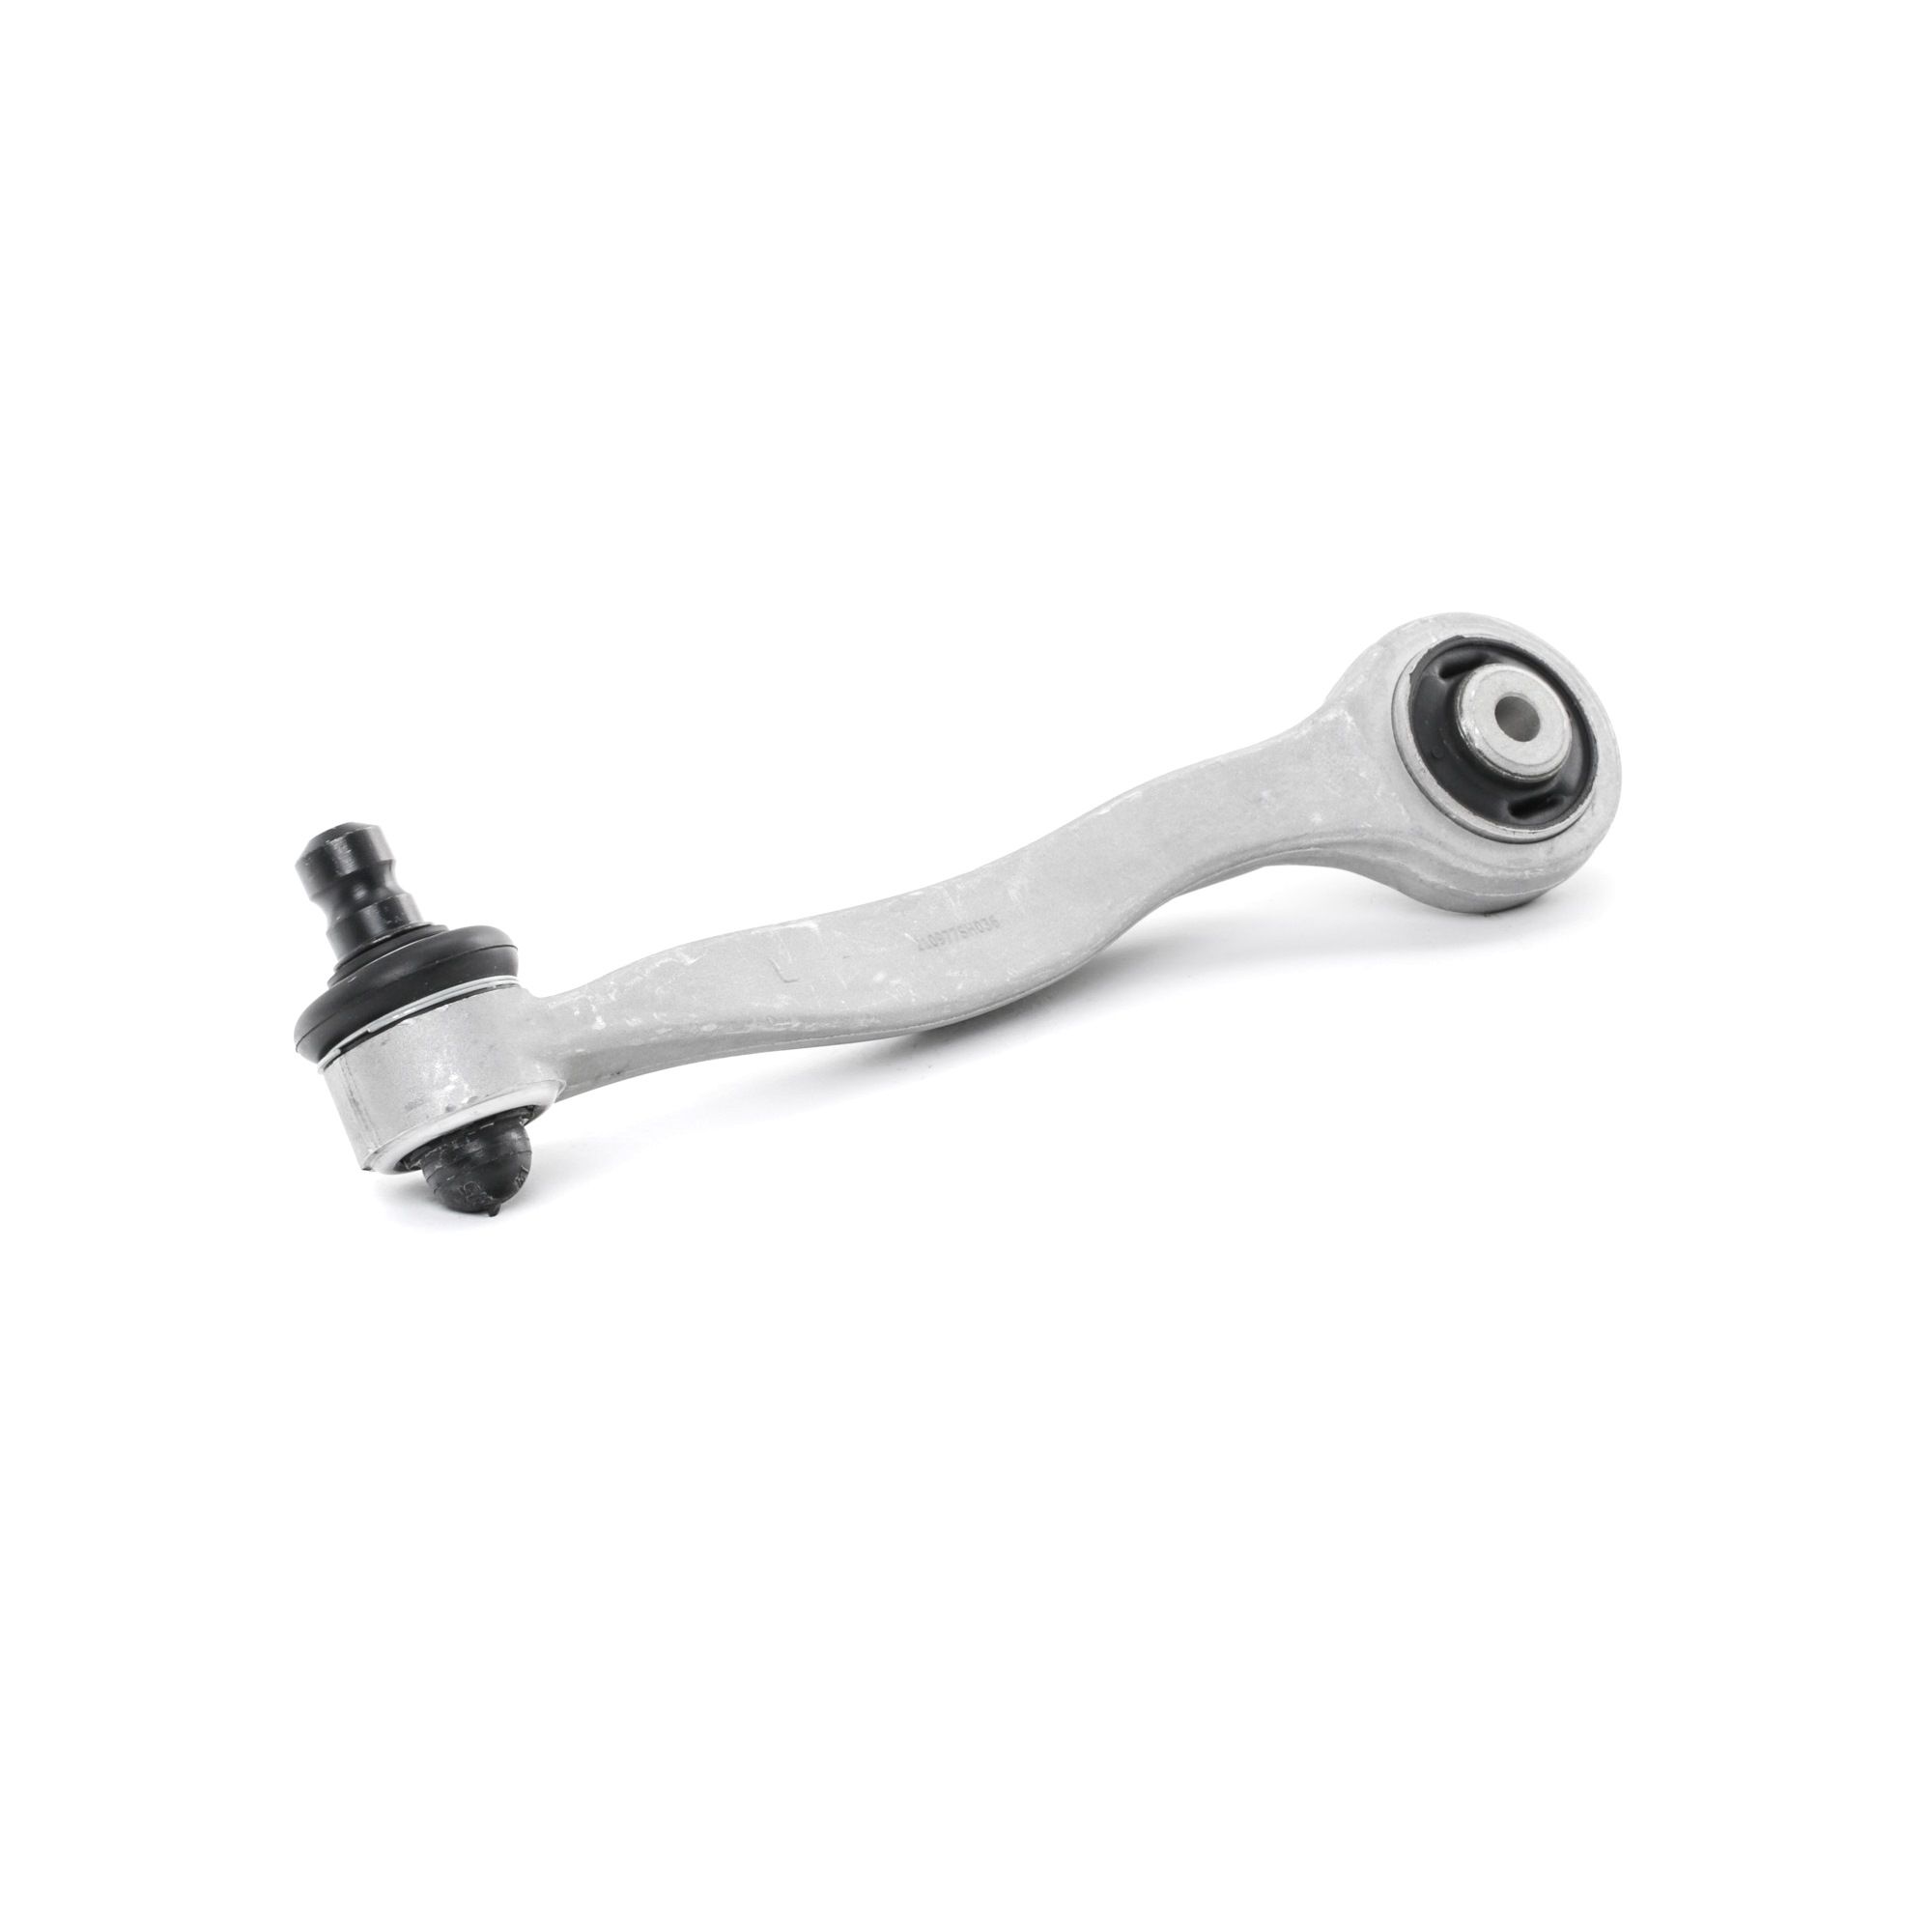 A.B.S. 210977 Suspension arm with ball joint, with rubber mount, Trailing Arm, Aluminium, Cone Size: 18 mm